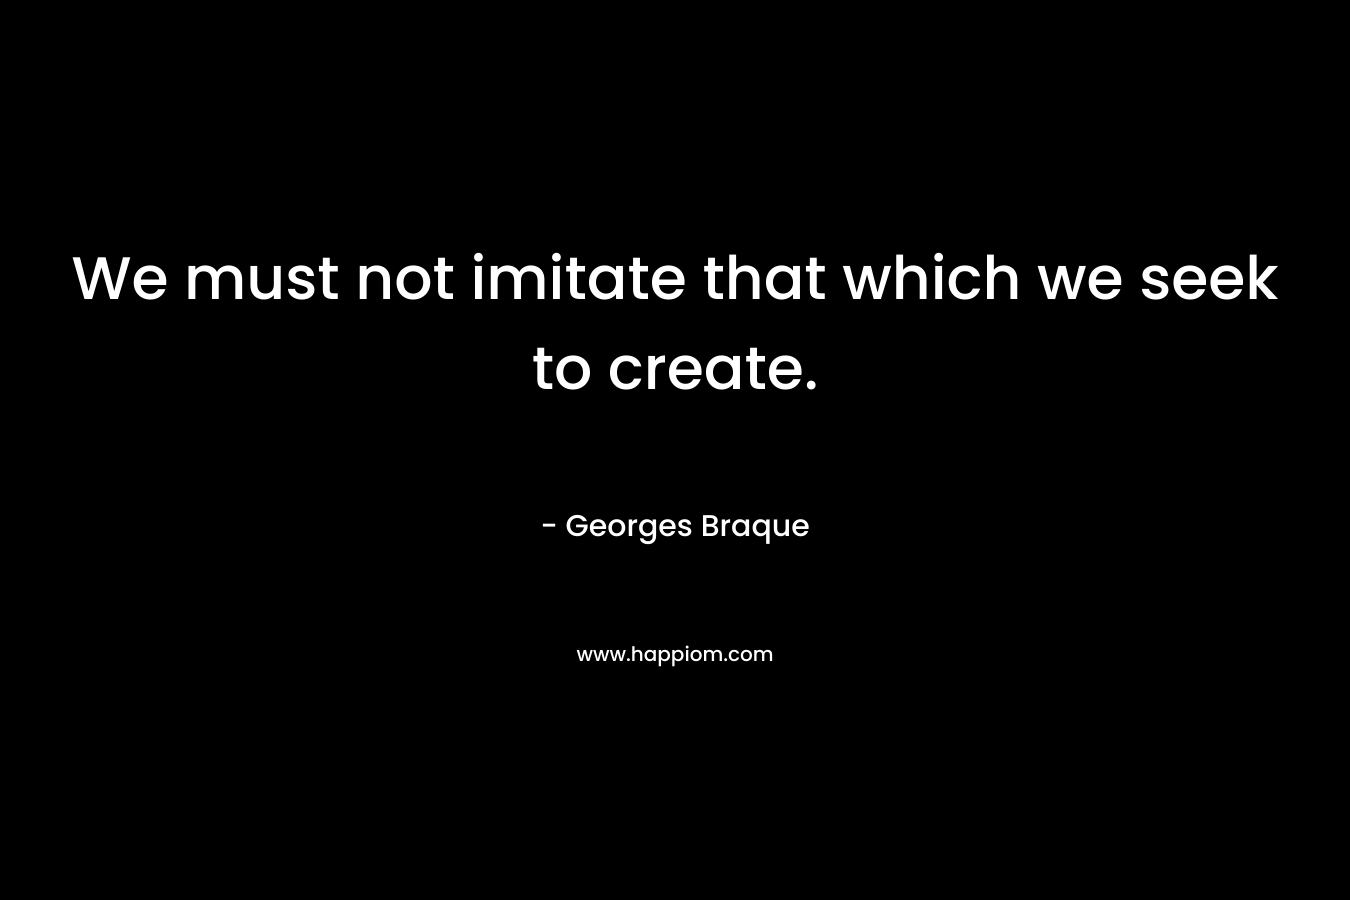 We must not imitate that which we seek to create. – Georges Braque